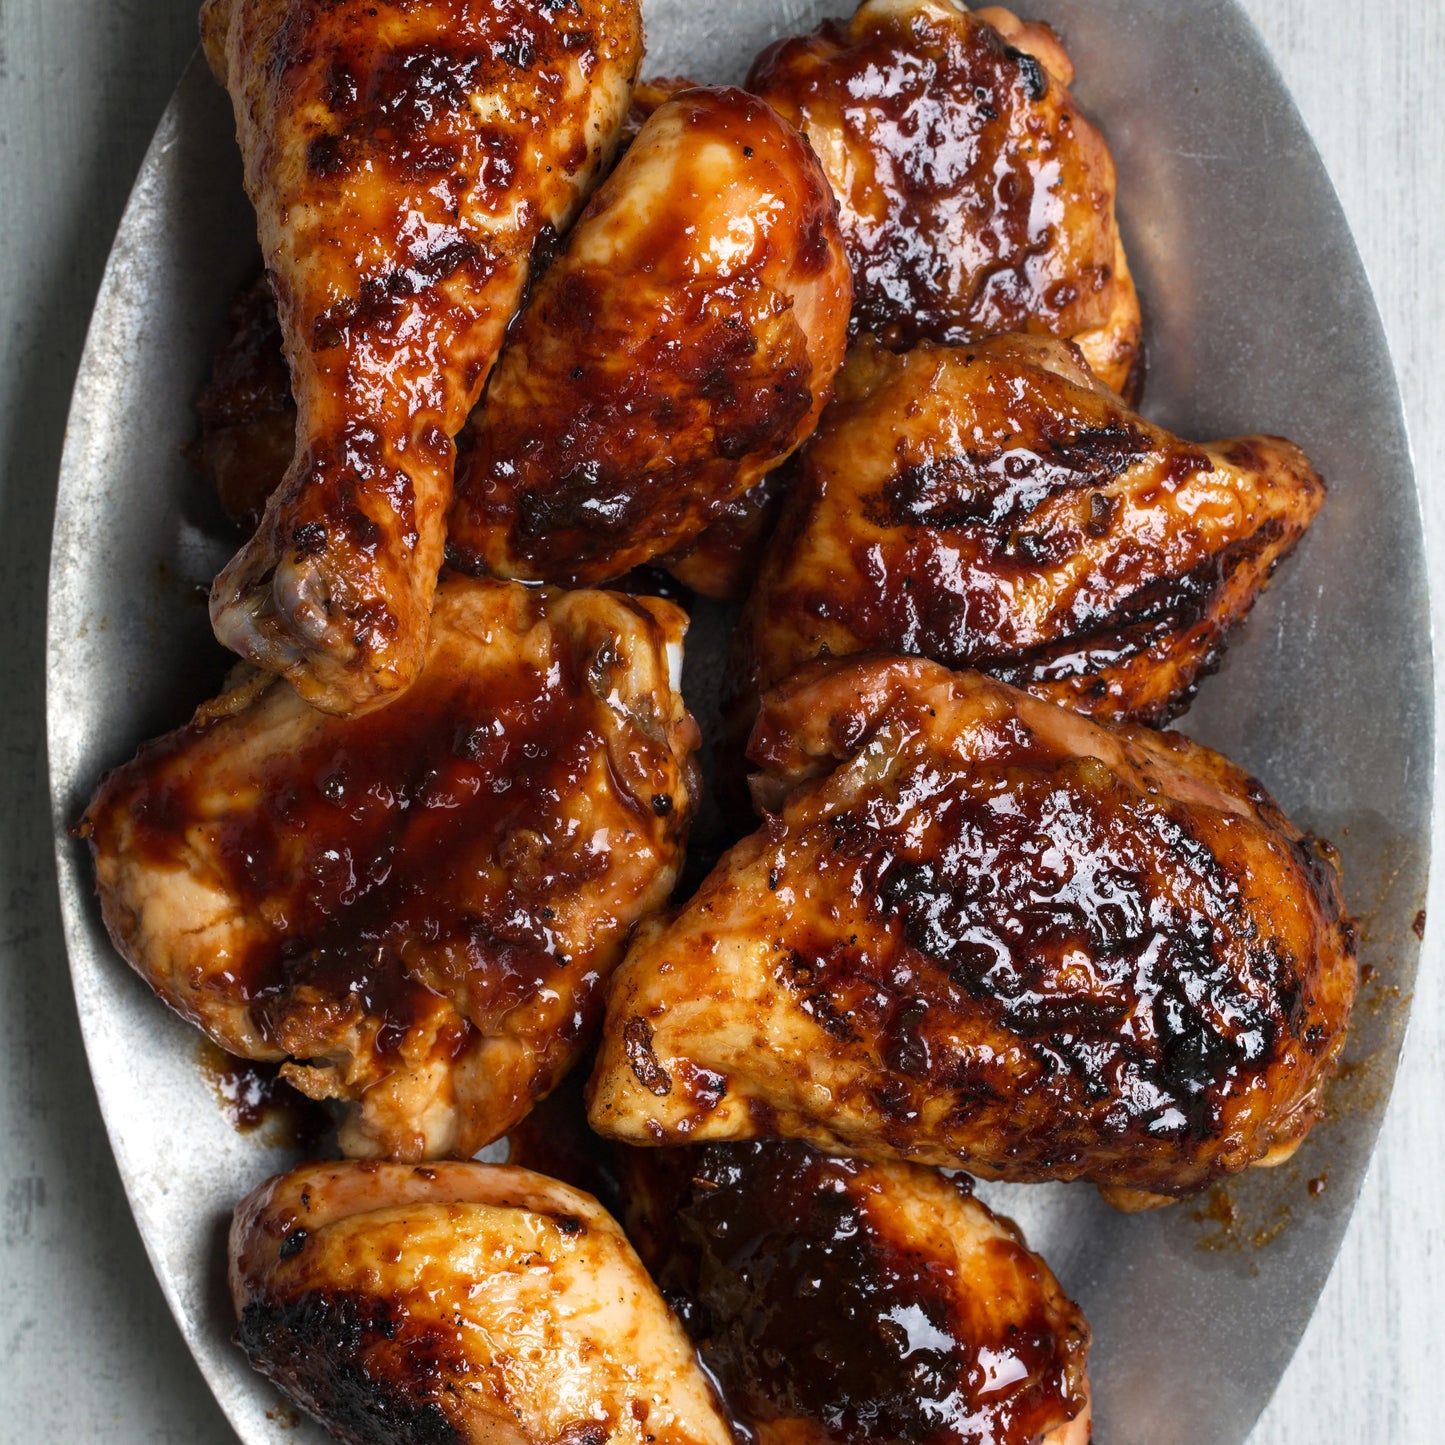 Grilled chicken leg quarters with sweet and sour sauce